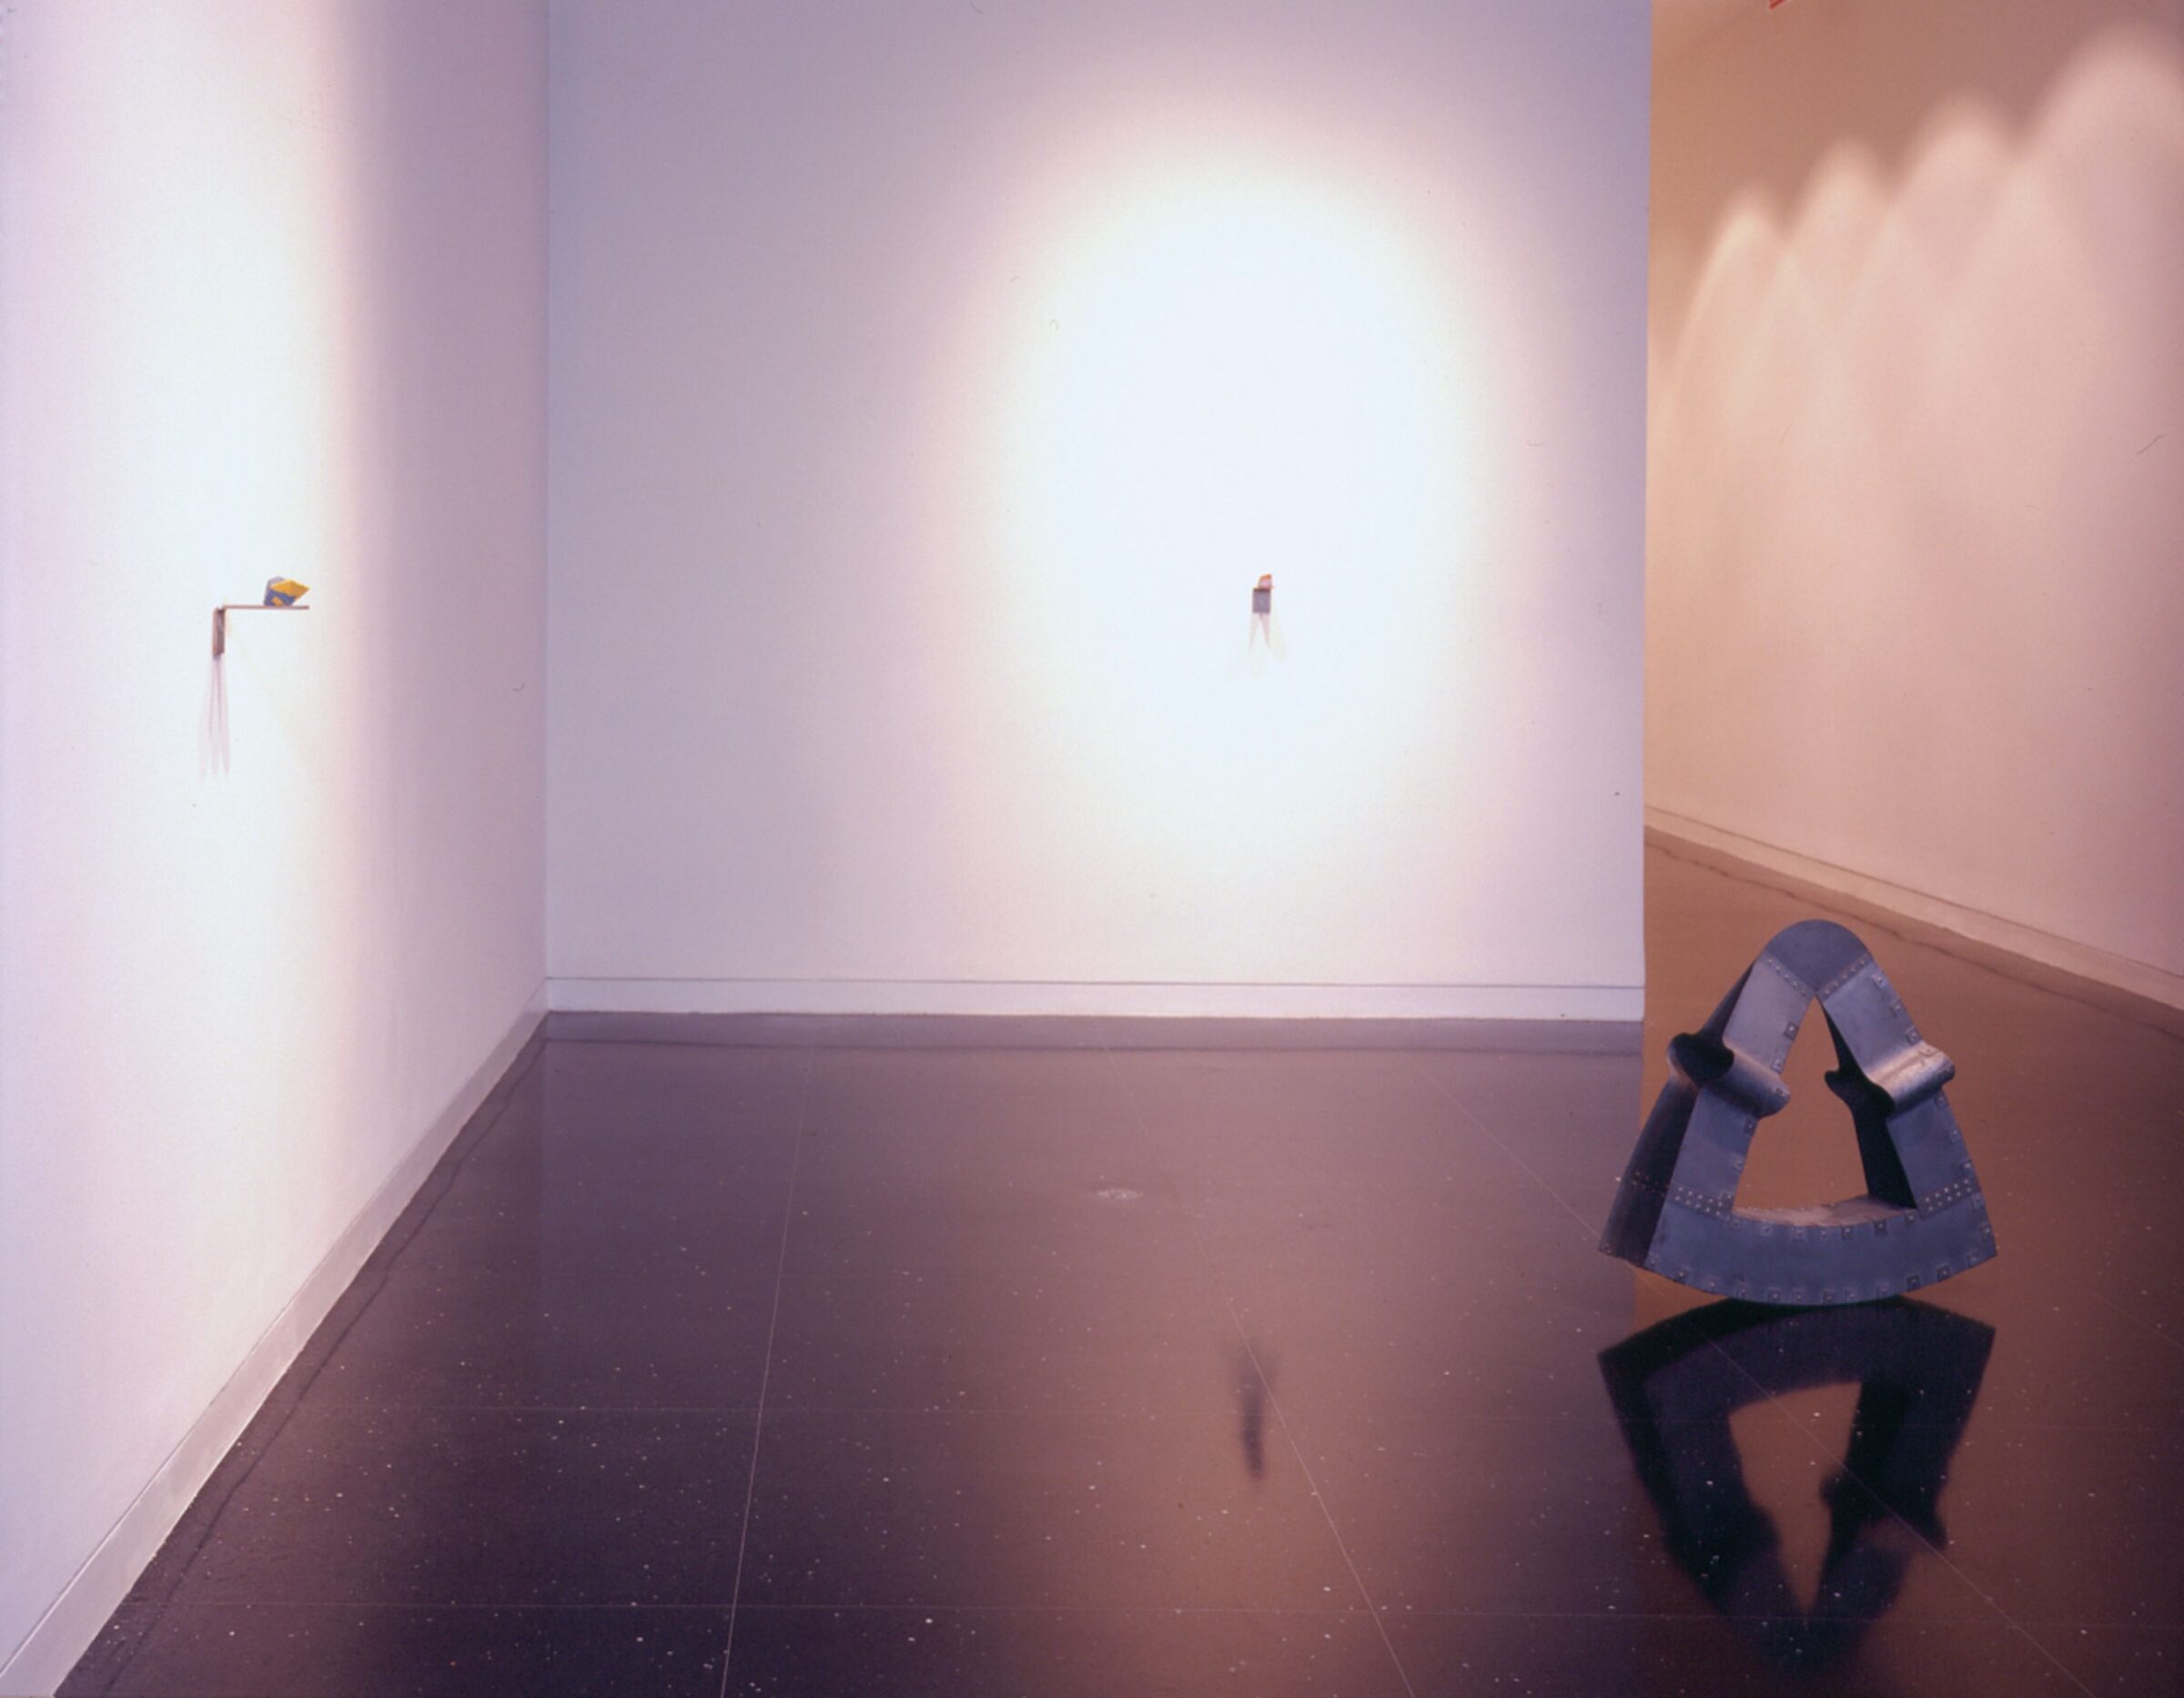 A white gallery space with a steel rocking sculpture on the floor and two very small rocklike sculptures installed on the walls.